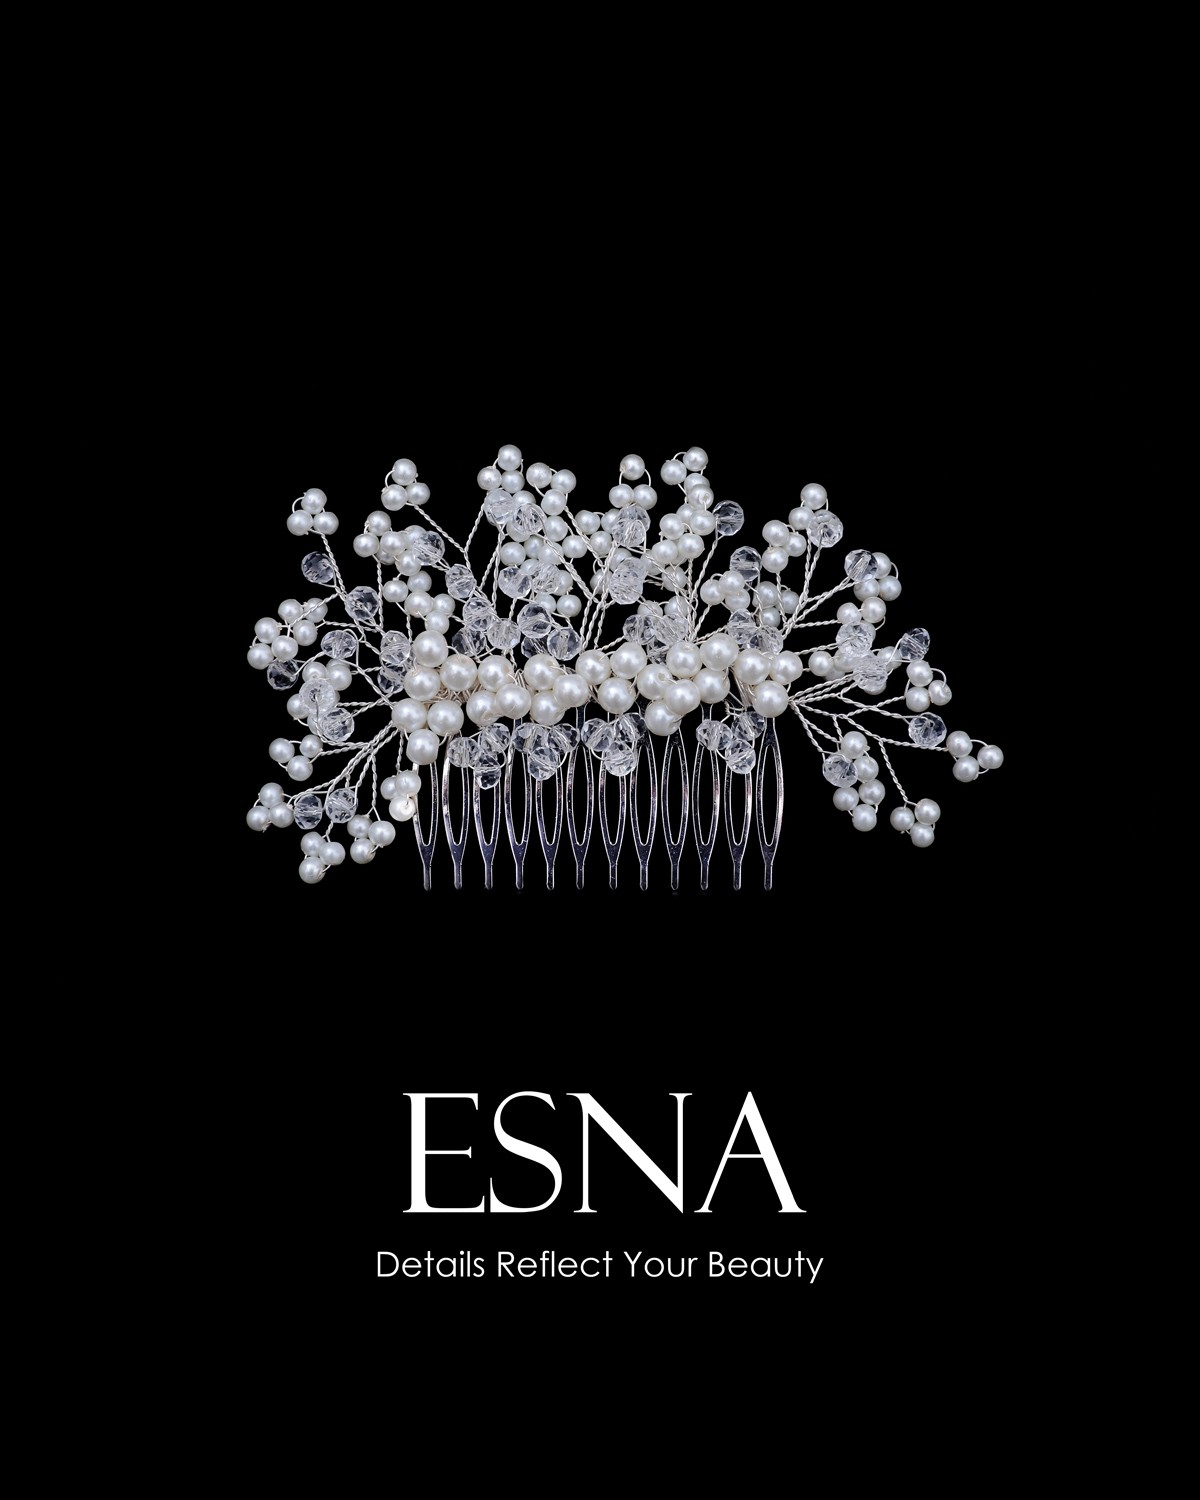 Esna Crystal Beads And Pearls Comb Hair Accessories Buy Now.